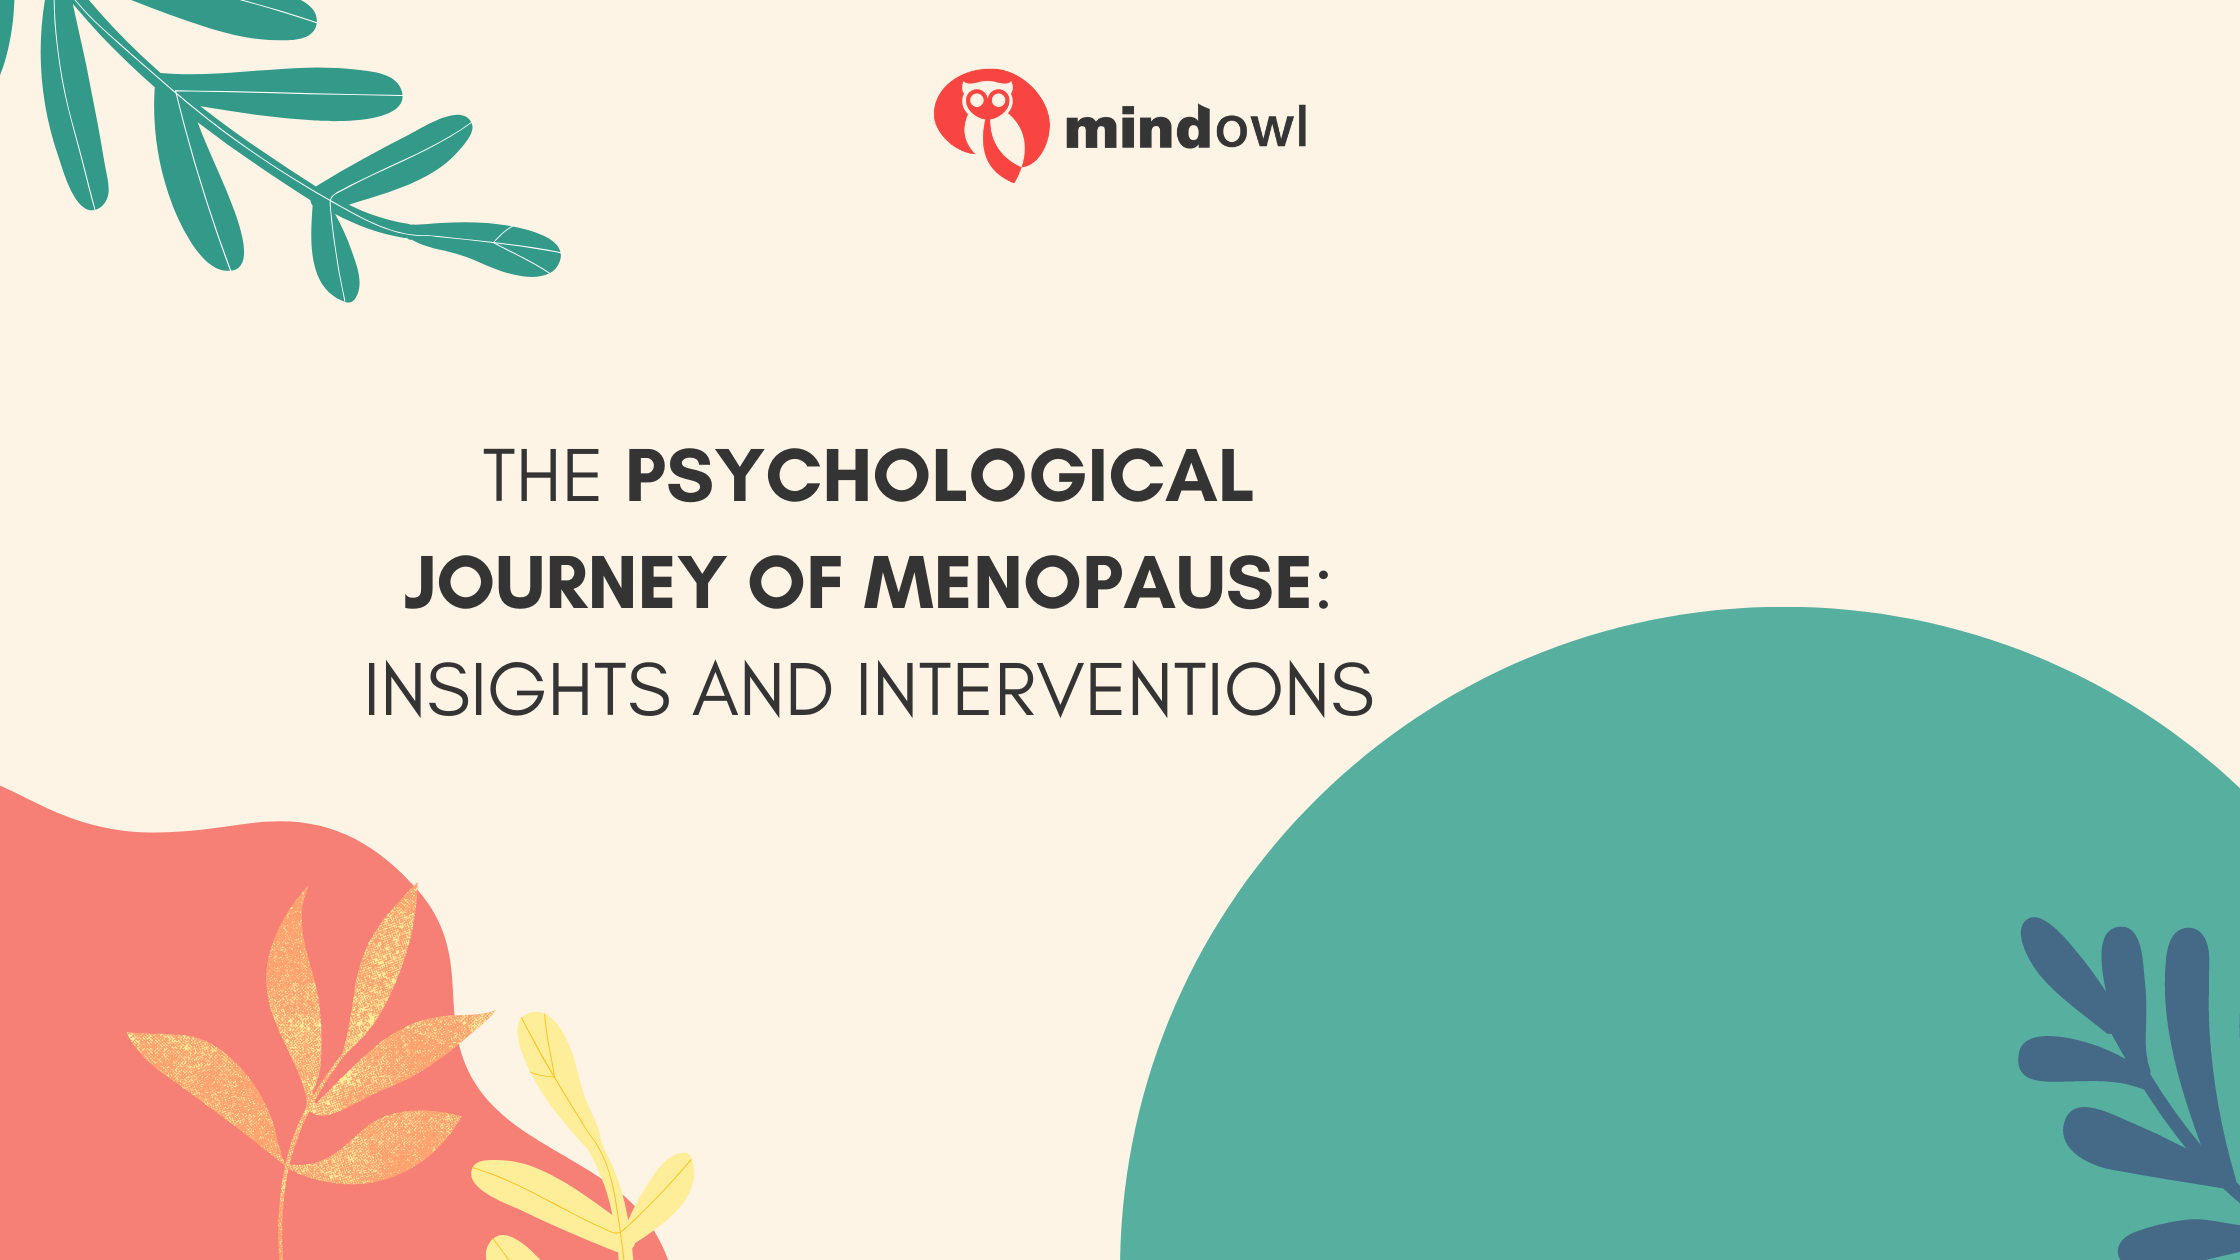 The Psychological Journey of Menopause: Insights and Interventions